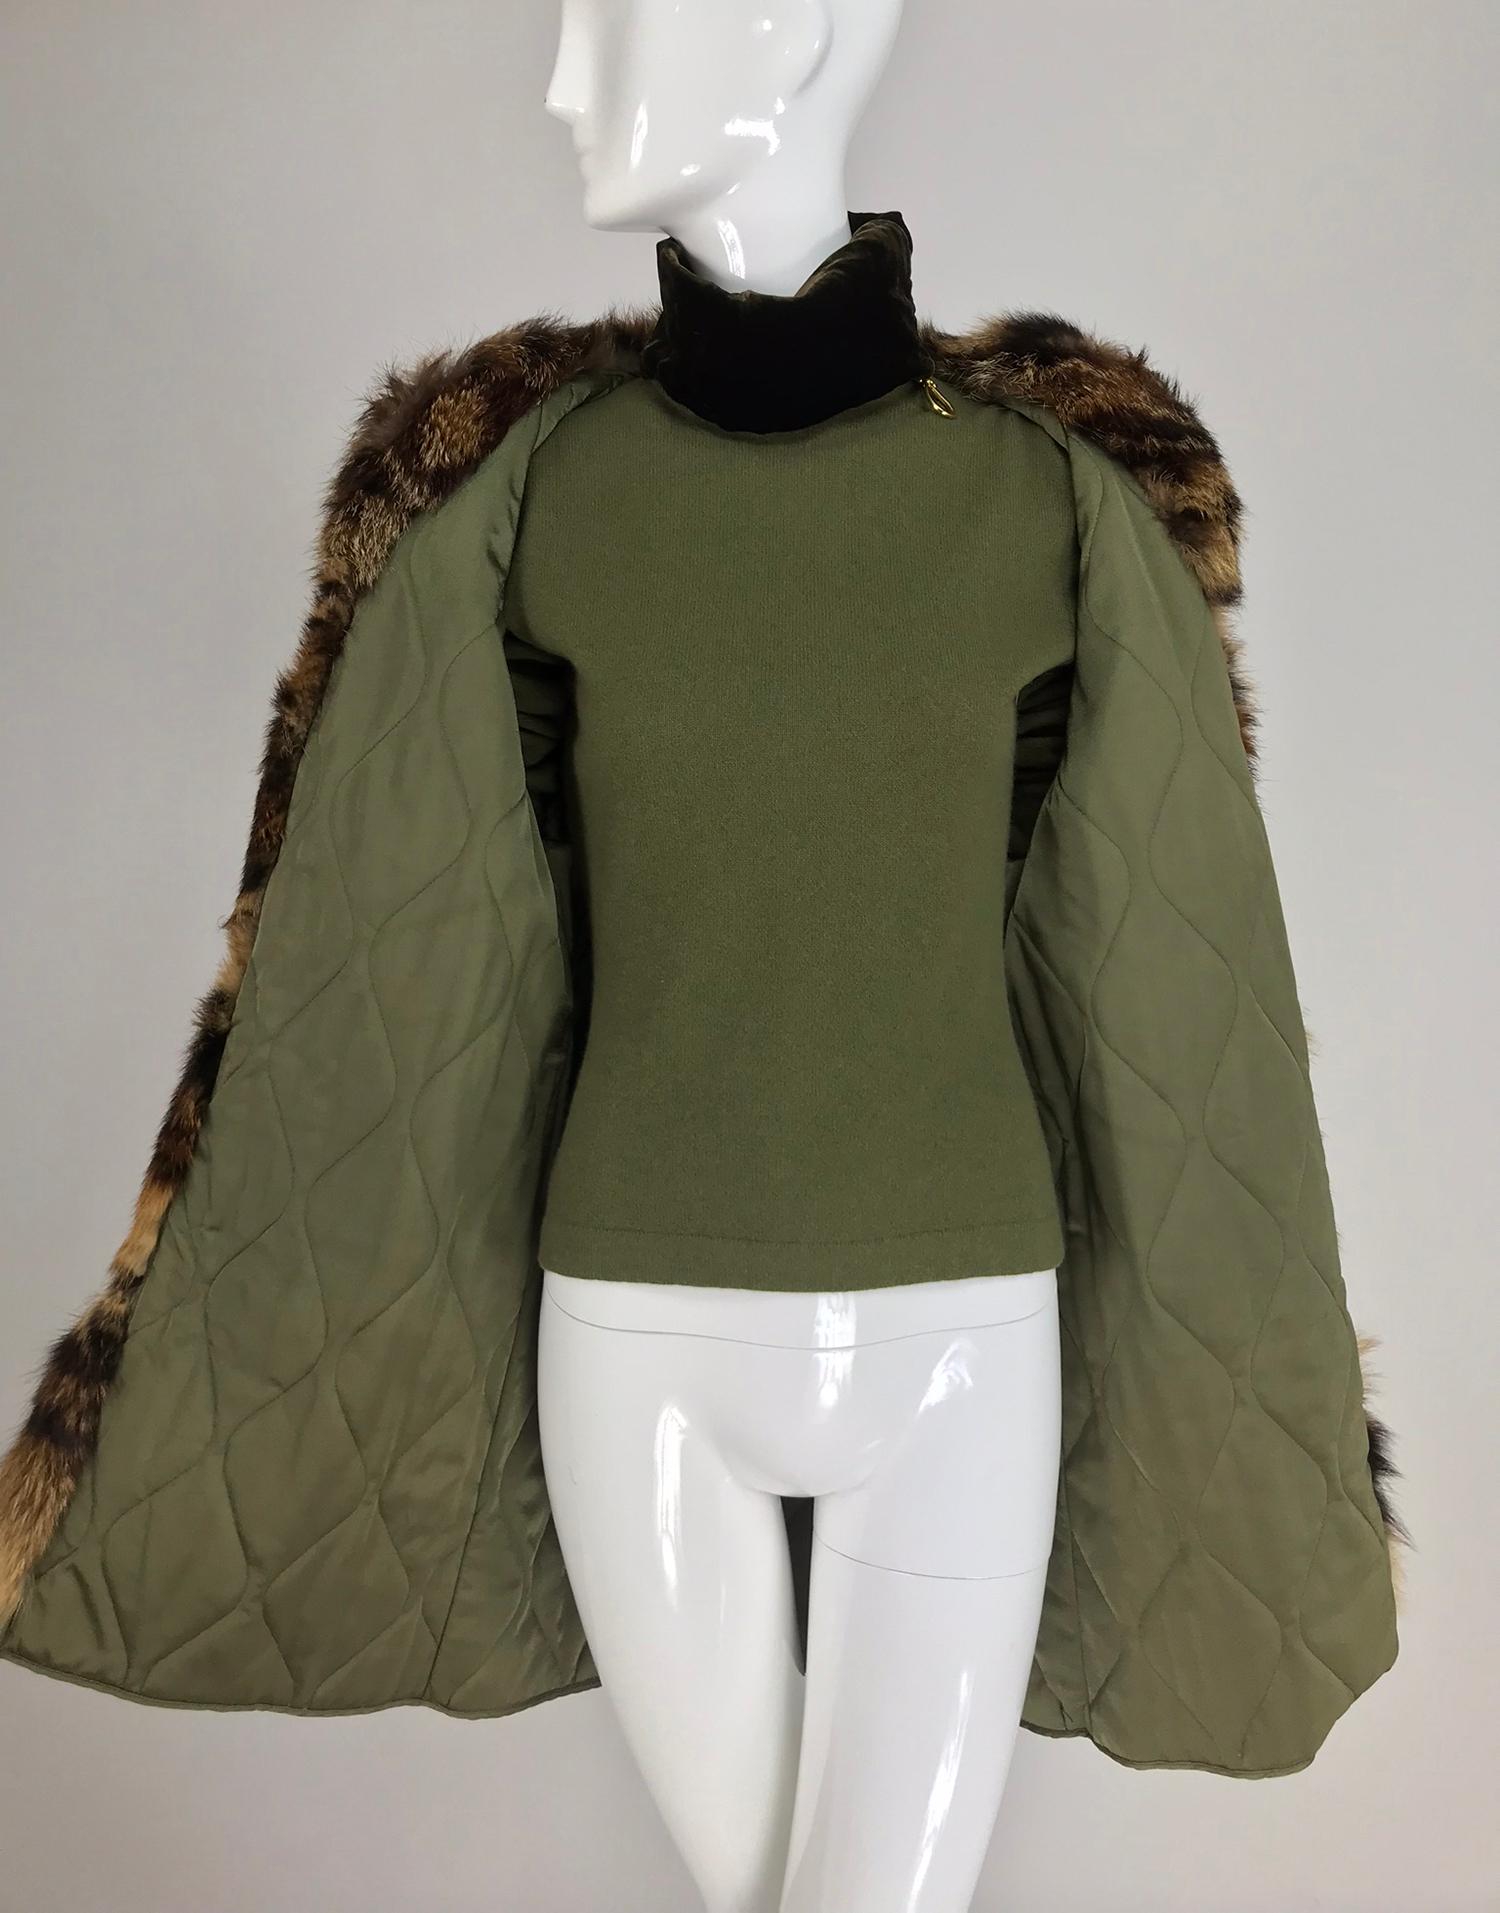 Gianfranco Ferre Olive Velvet and Fur Trimmed quilted jacket and sweater 1990s 5